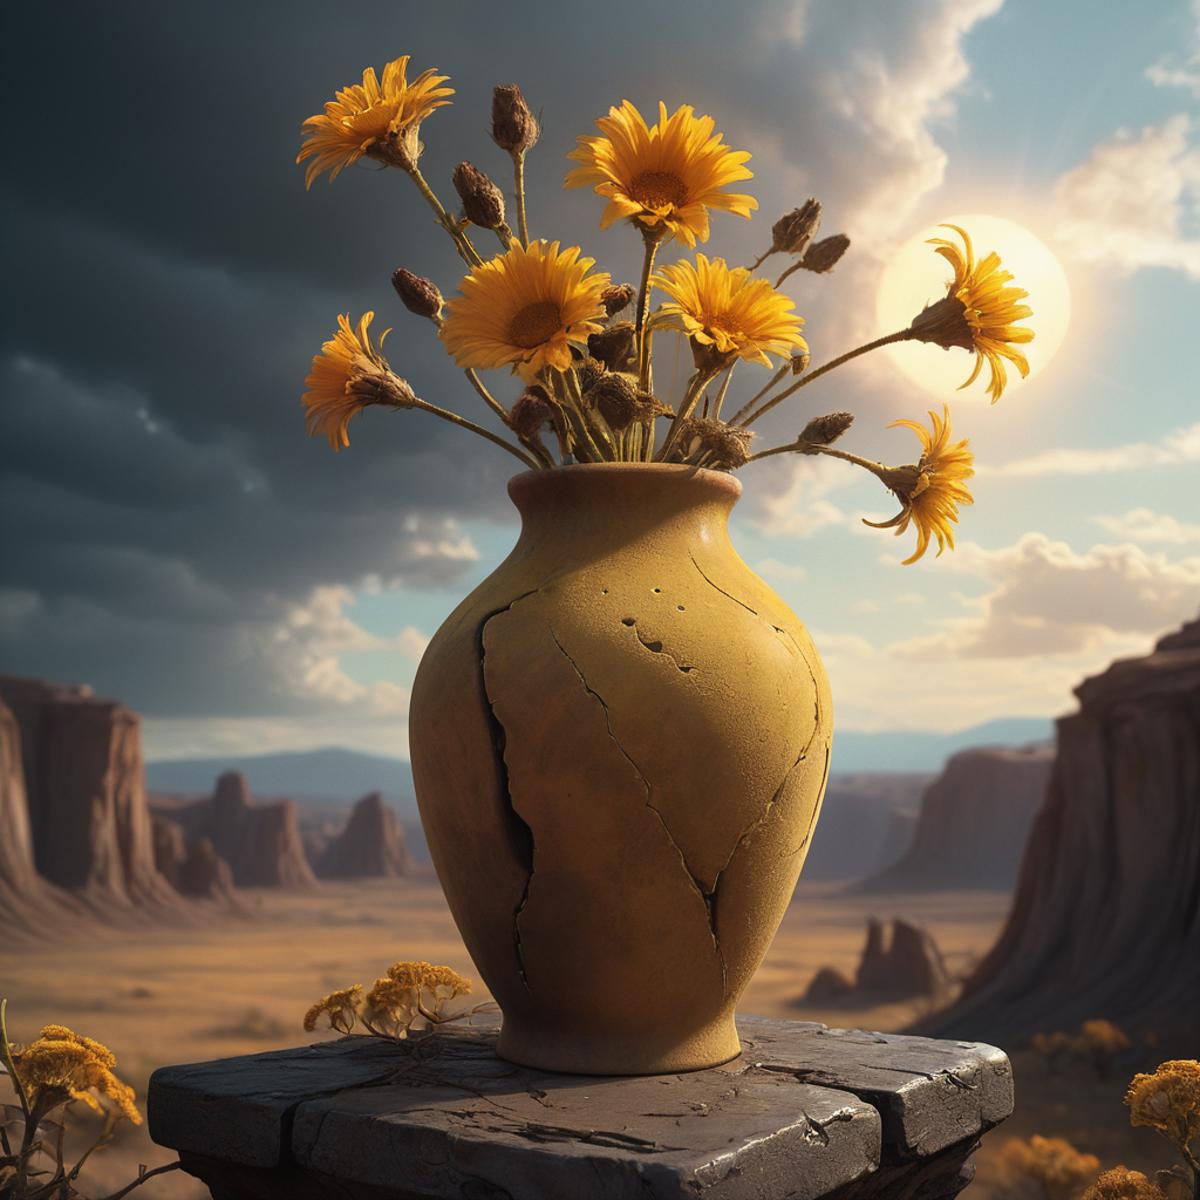 Yellow Flowers in a Vase on a Rock in the Desert